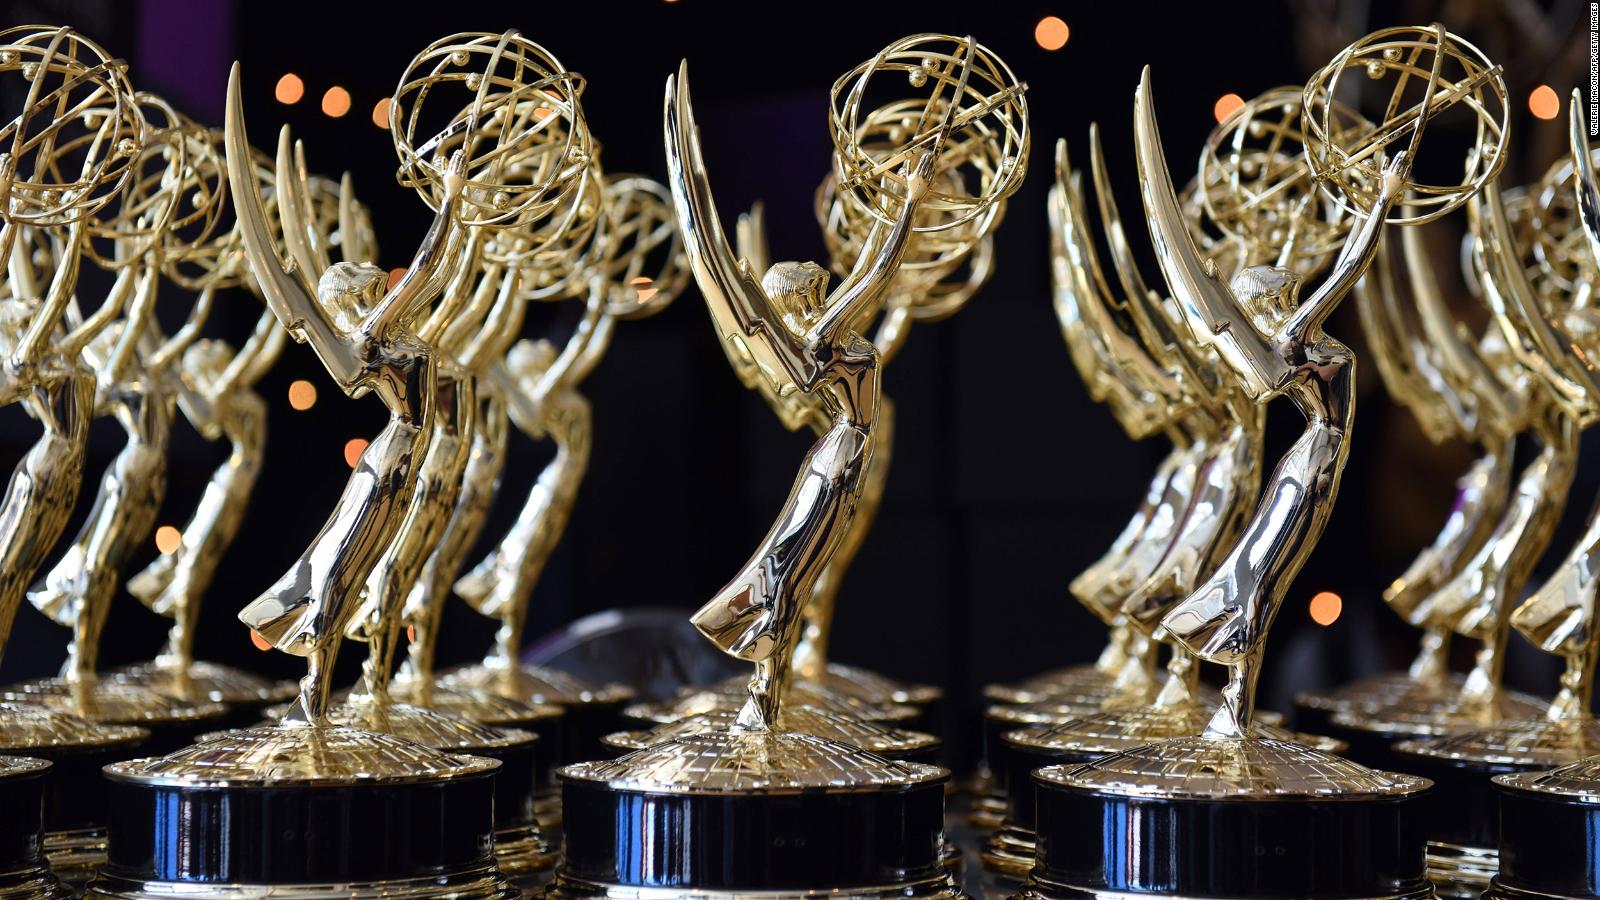 This show leads the pack with 25 Emmy nominations CNN Video